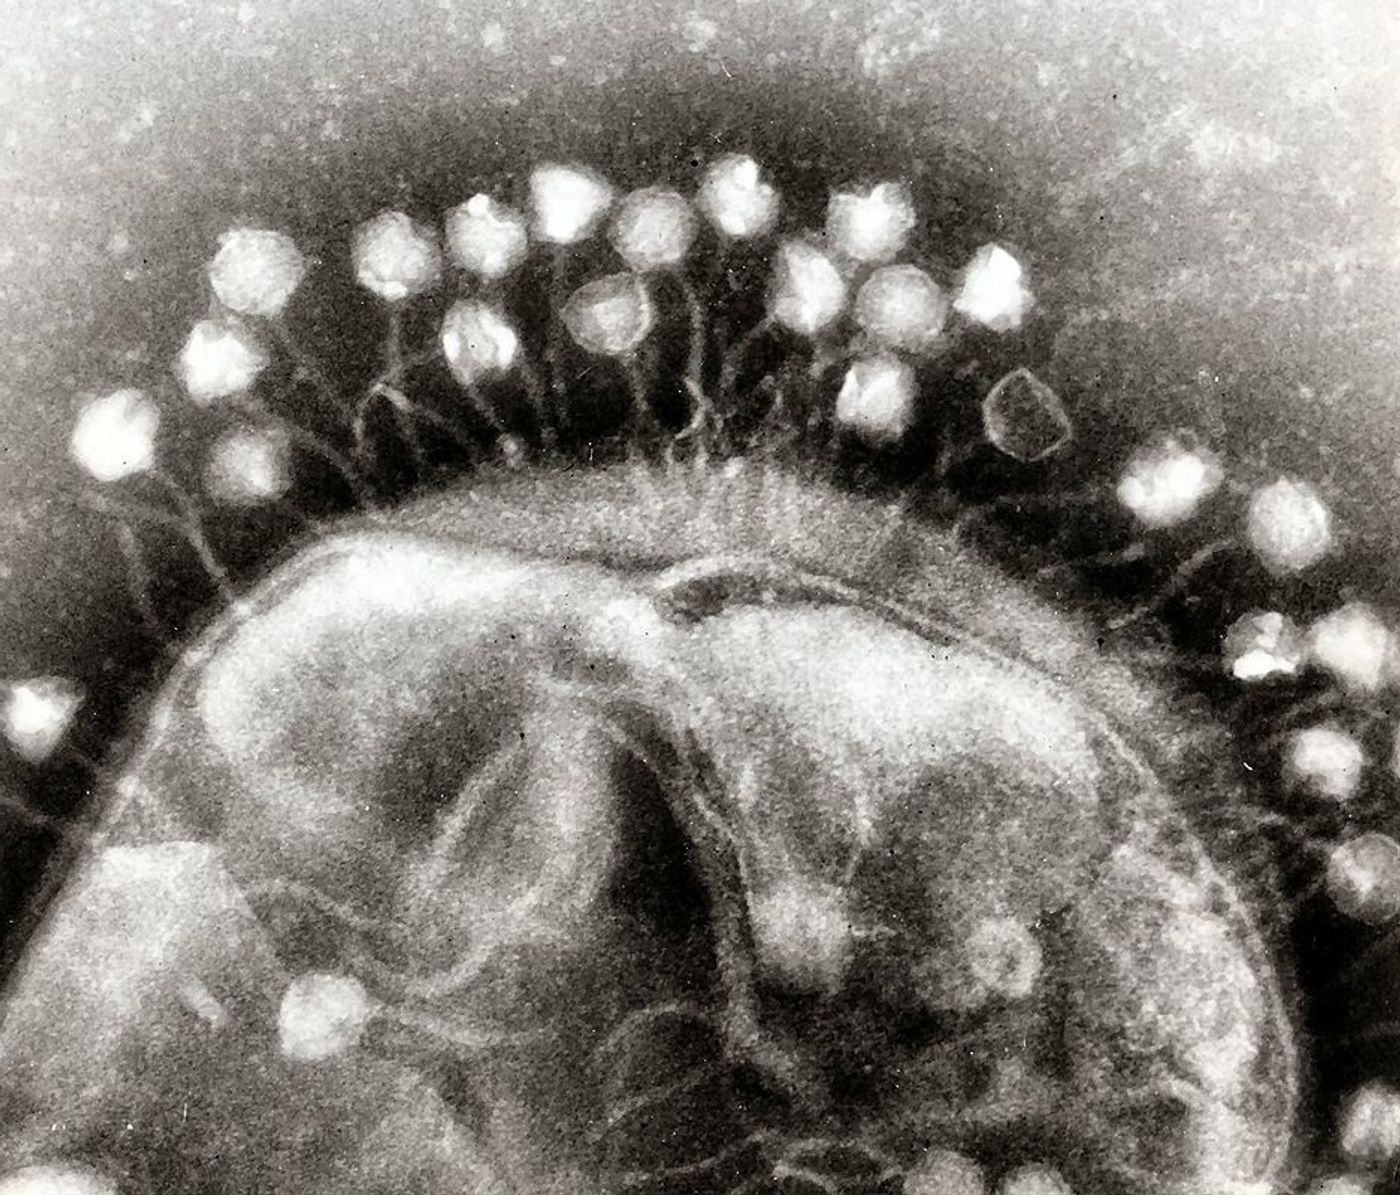  Electron micrograph of bacteriophages attached to a bacterial cell, the viruses are the size and shape of coliphage T1. / Credit: Dr Graham Beards 